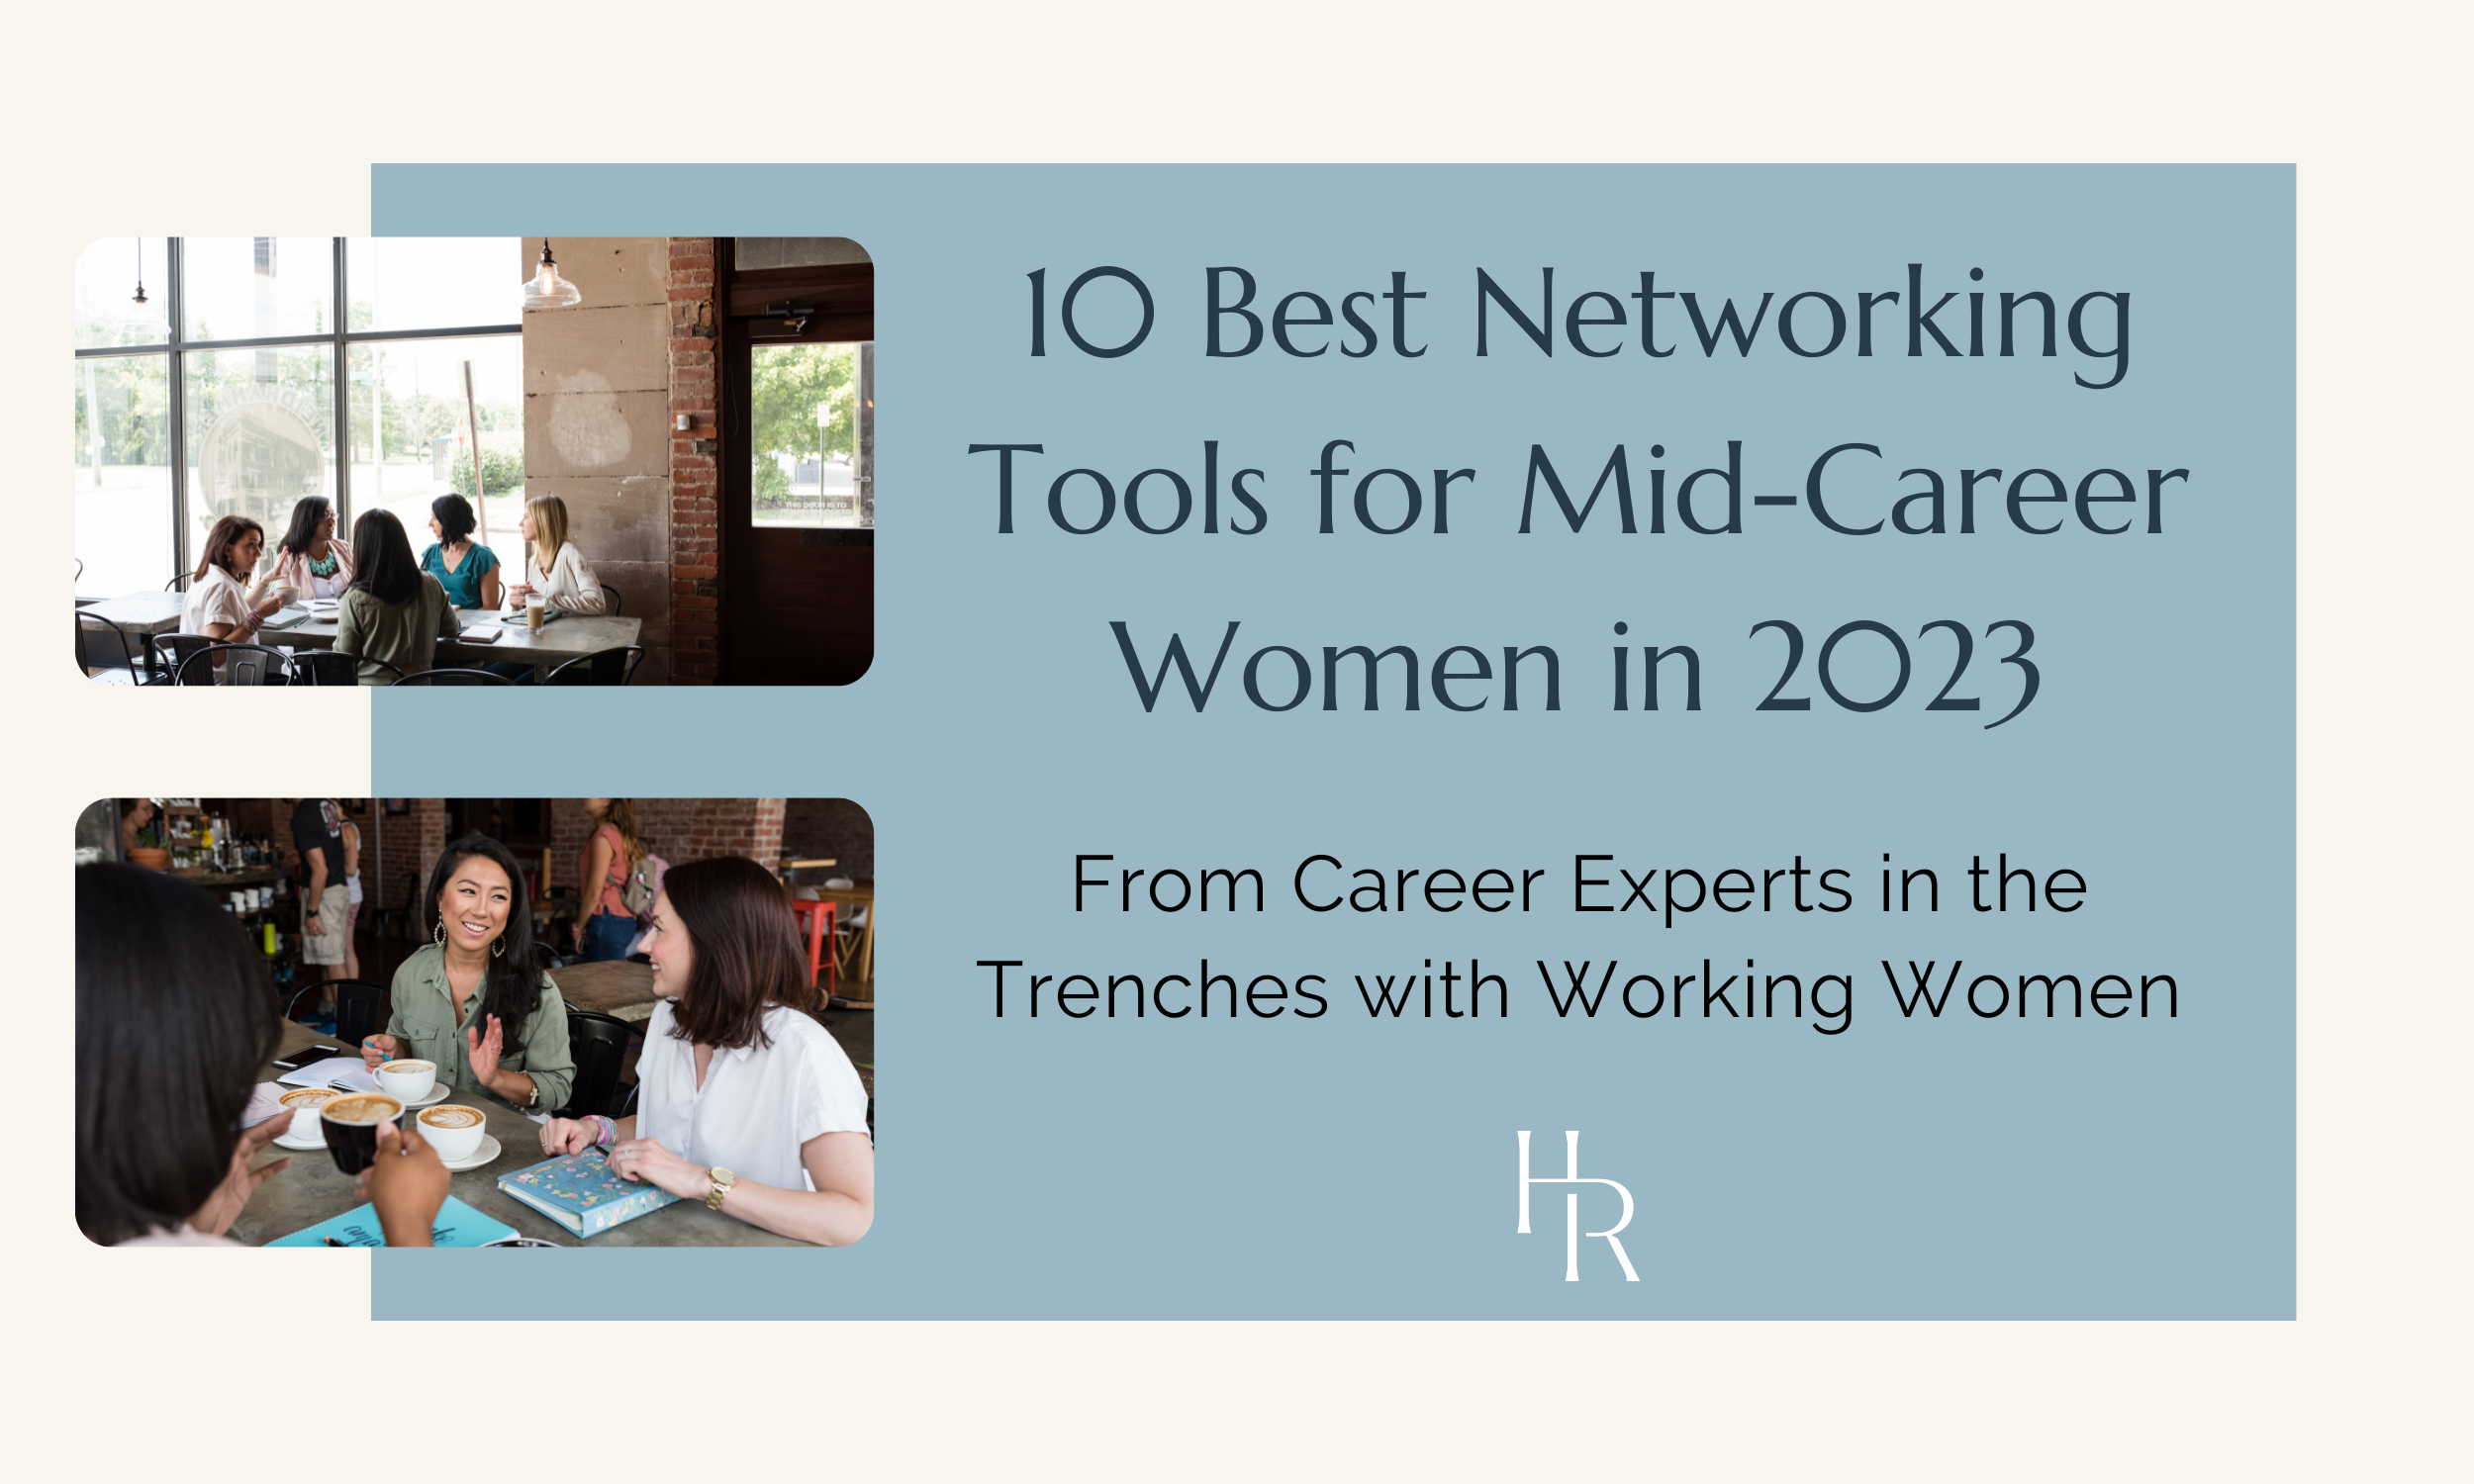 10 Best Networking Tools for Mid-Career Women in 2023